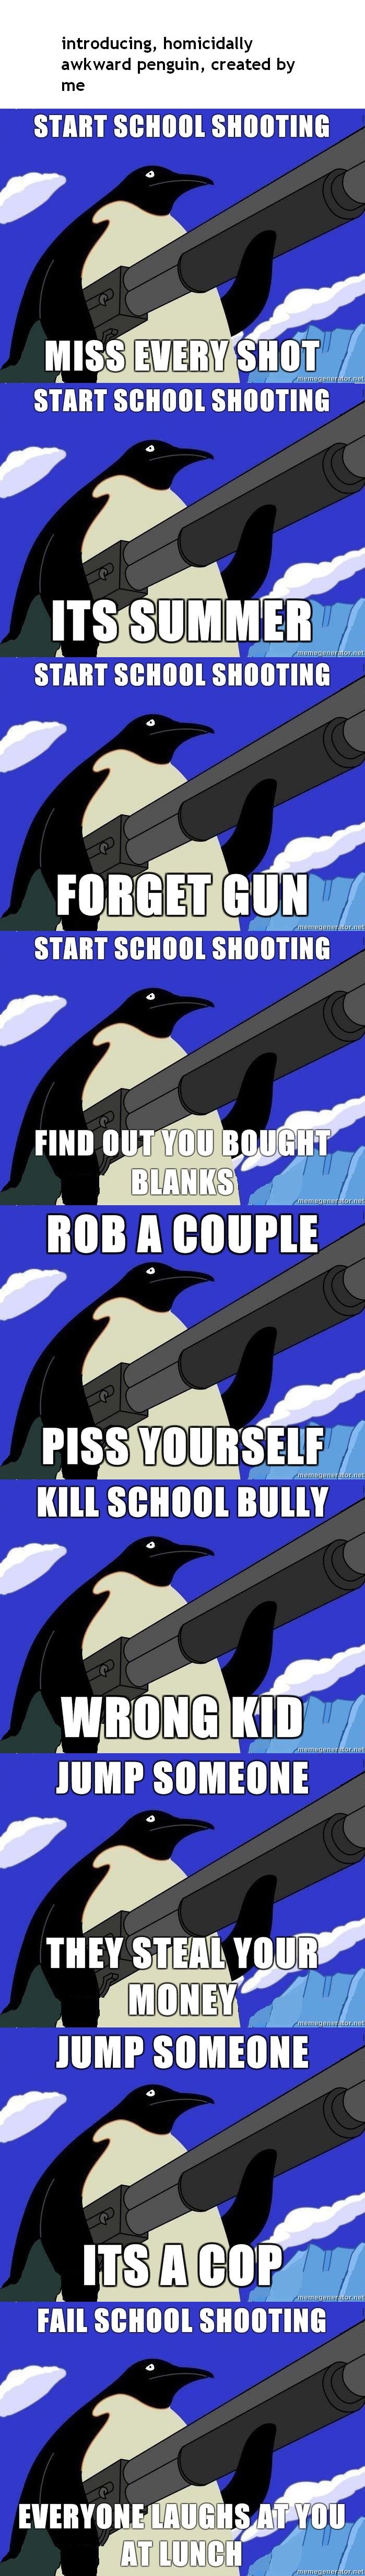 homicidally awkward penguin. the meme was made by me&lt;br /&gt; i will not be making another one............unless. introducing, homicide awkward penguin, crea